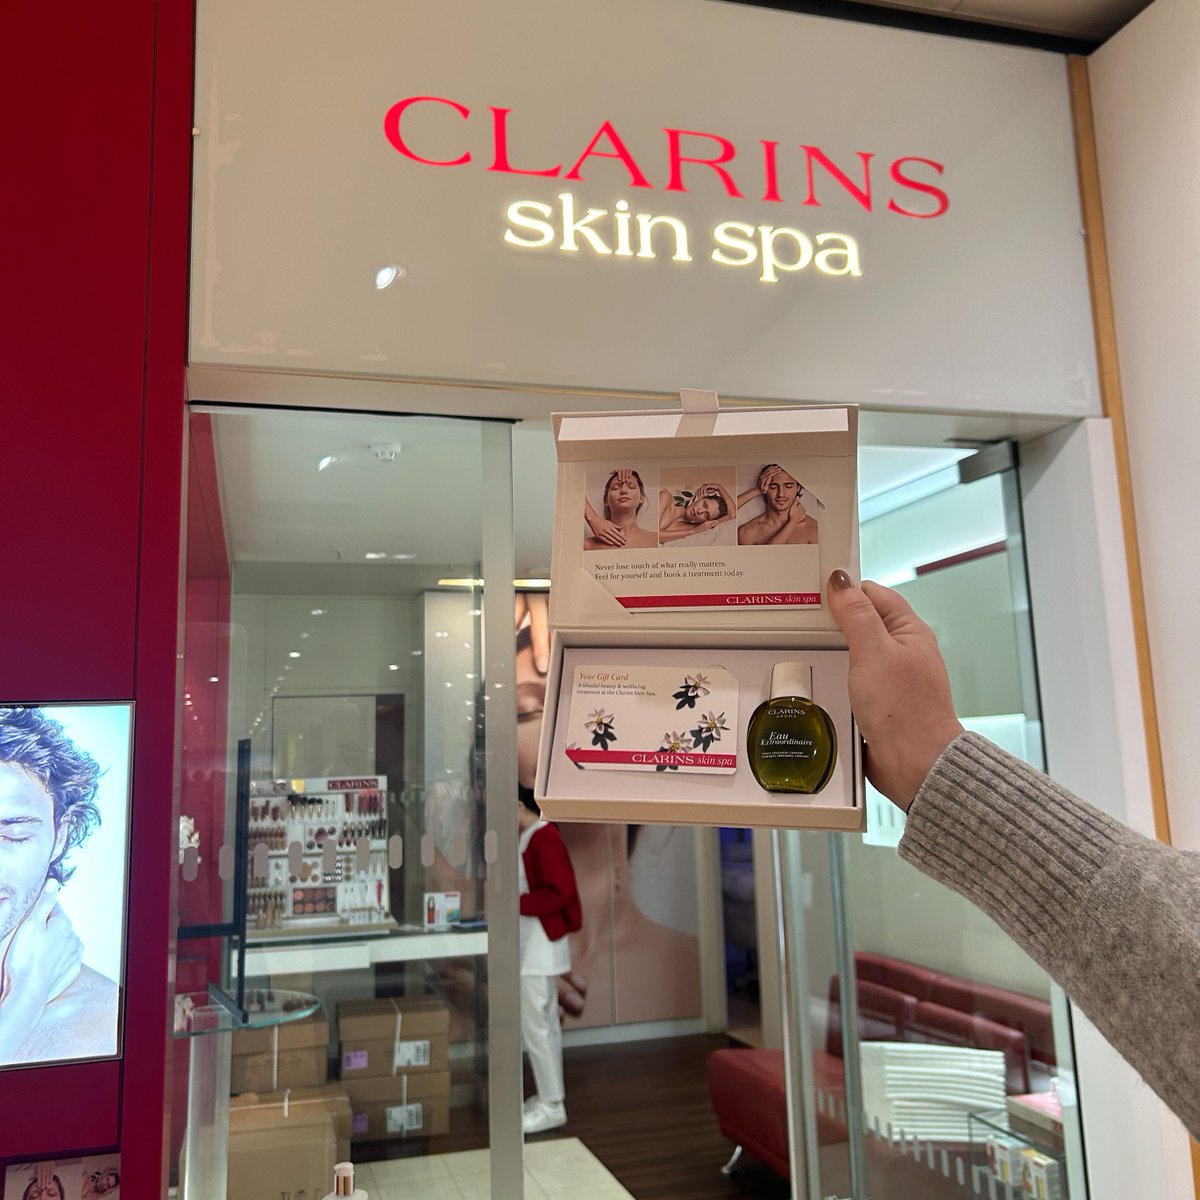 There's still time to book your Mother's Day experience gifts at @JohnLewisRetail! From personal styling sessions to the @clarins_uk spa, @JohnLewisRetail has you covered for experience gifts she'll never forget. Don't miss out - head to the store to book today!